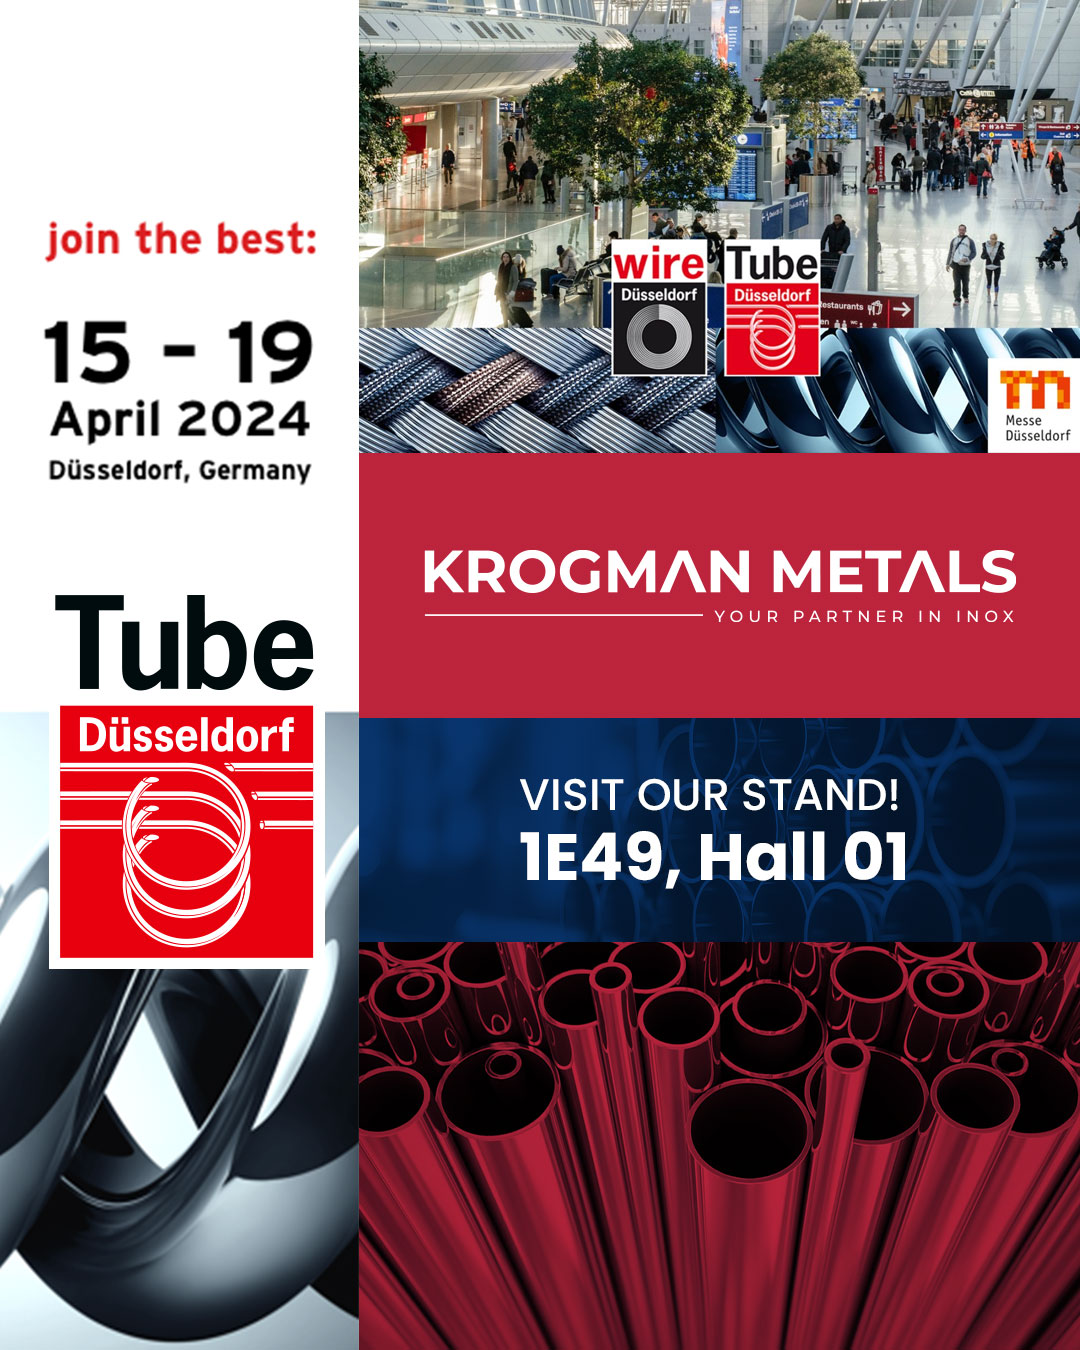 Mark your calendars: Krogman Metals BV is exhibiting at Tube 2024 (April 15-19) in Düsseldorf, Germany!  Find us at Hall 01, Booth 1E49. Don't miss out - we look forward to seeing you there!